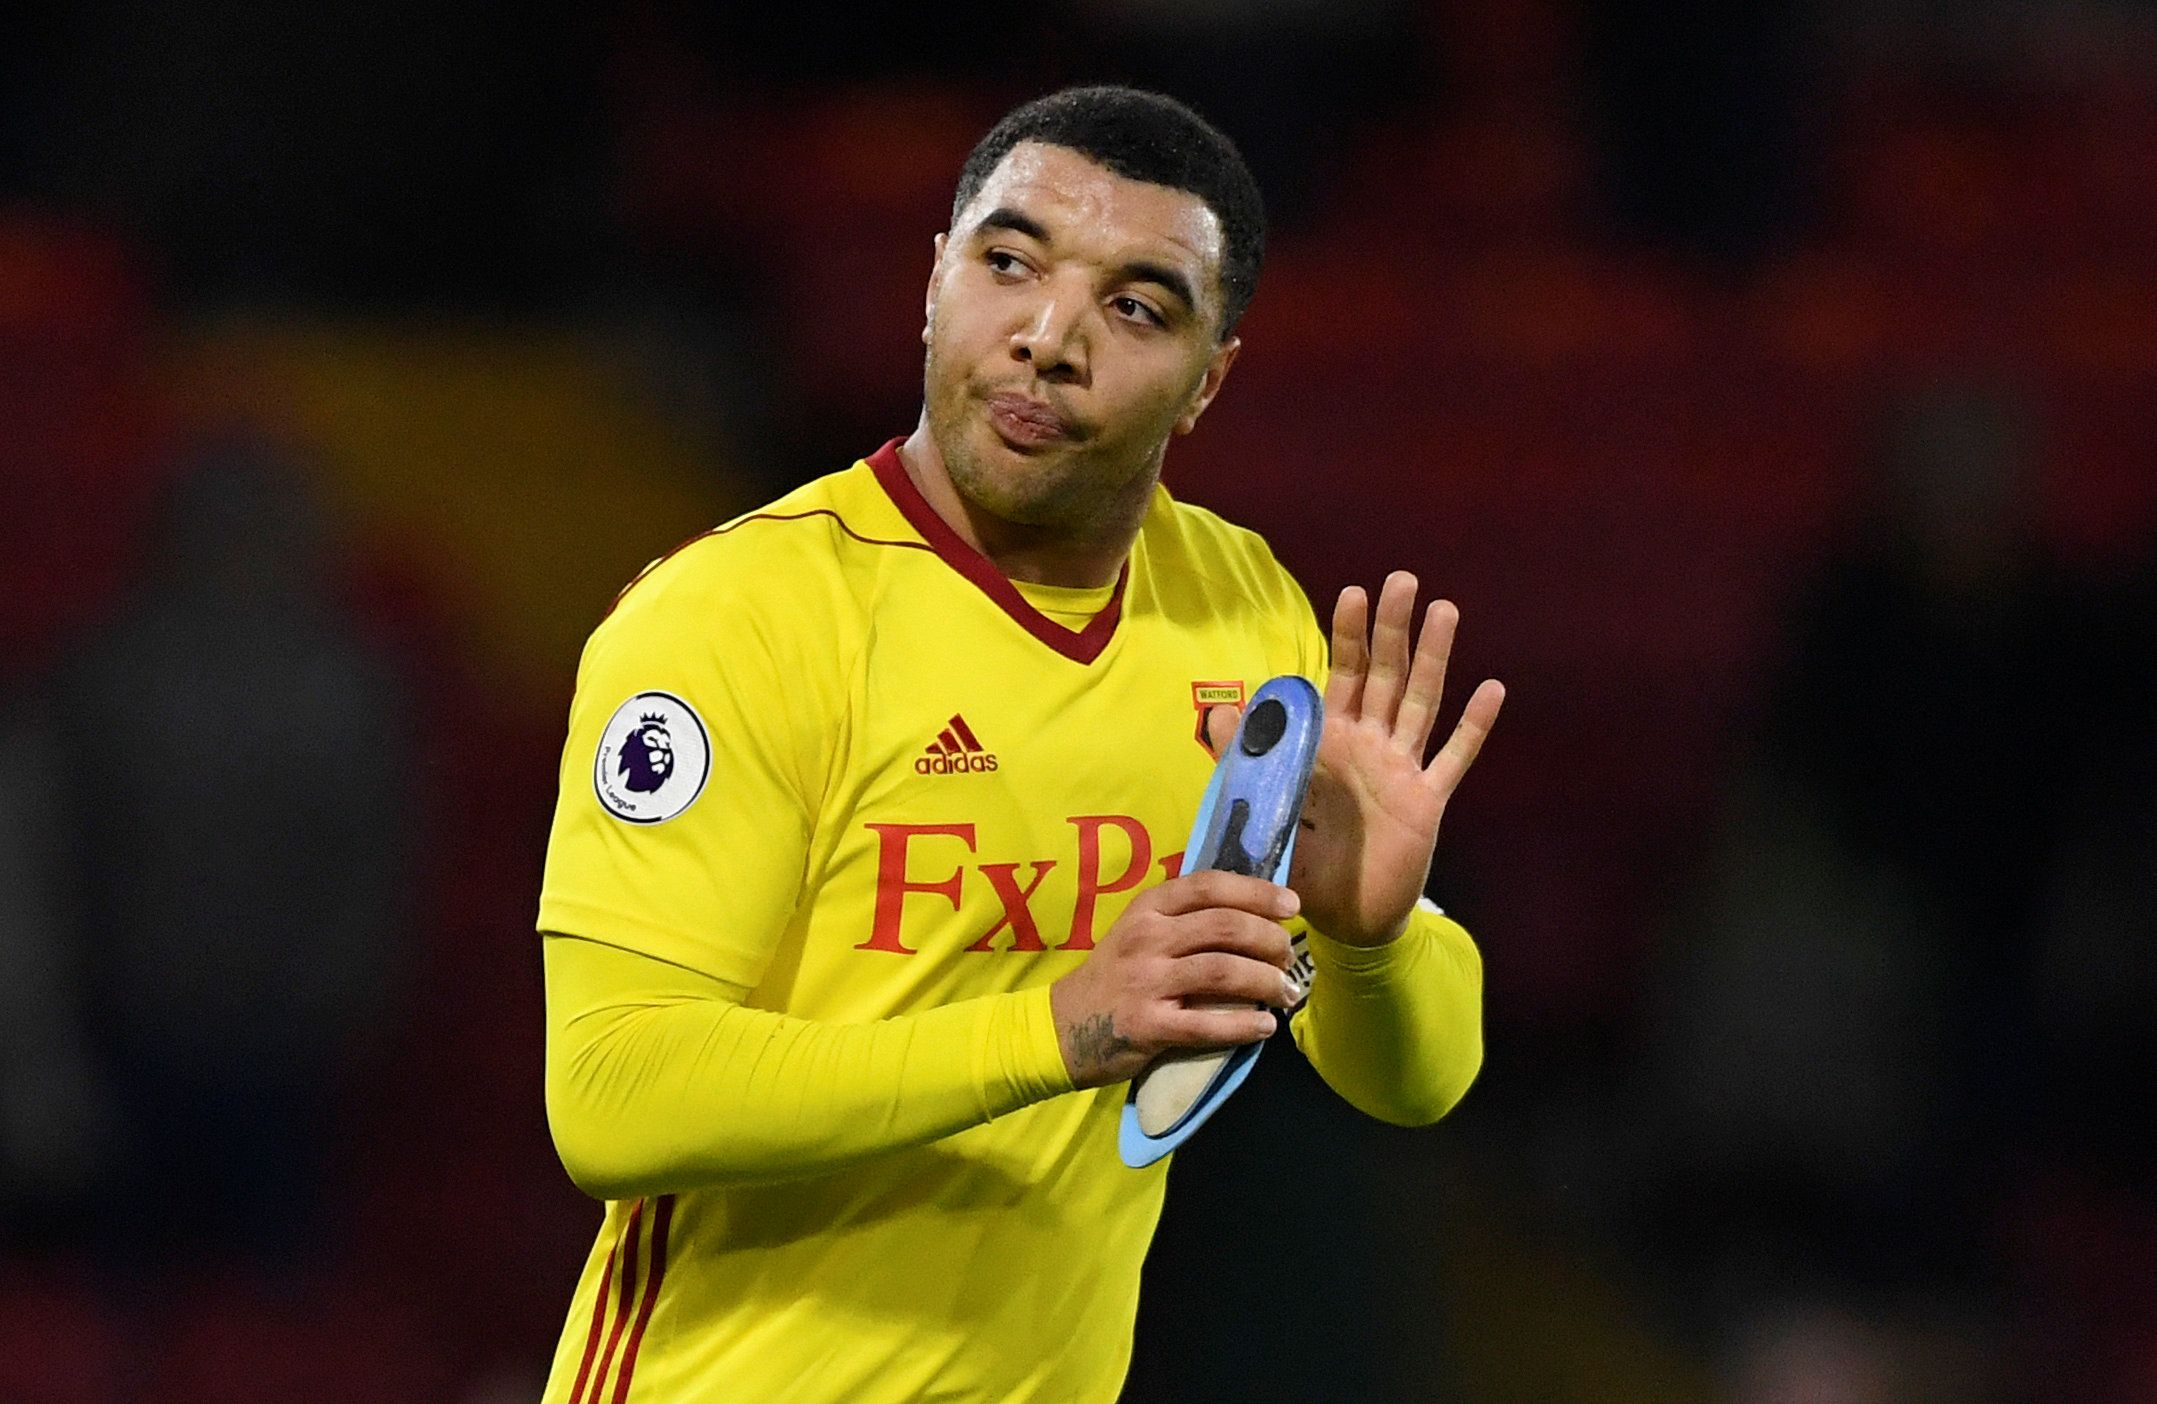 Soccer Football - Premier League - Watford vs Southampton - Vicarage Road, Watford, Britain - January 13, 2018   Watford's Troy Deeney applauds the fans at the end of the match    Action Images via Reuters/Tony O'Brien    EDITORIAL USE ONLY. No use with unauthorized audio, video, data, fixture lists, club/league logos or "live" services. Online in-match use limited to 75 images, no video emulation. No use in betting, games or single club/league/player publications.  Please contact your account r